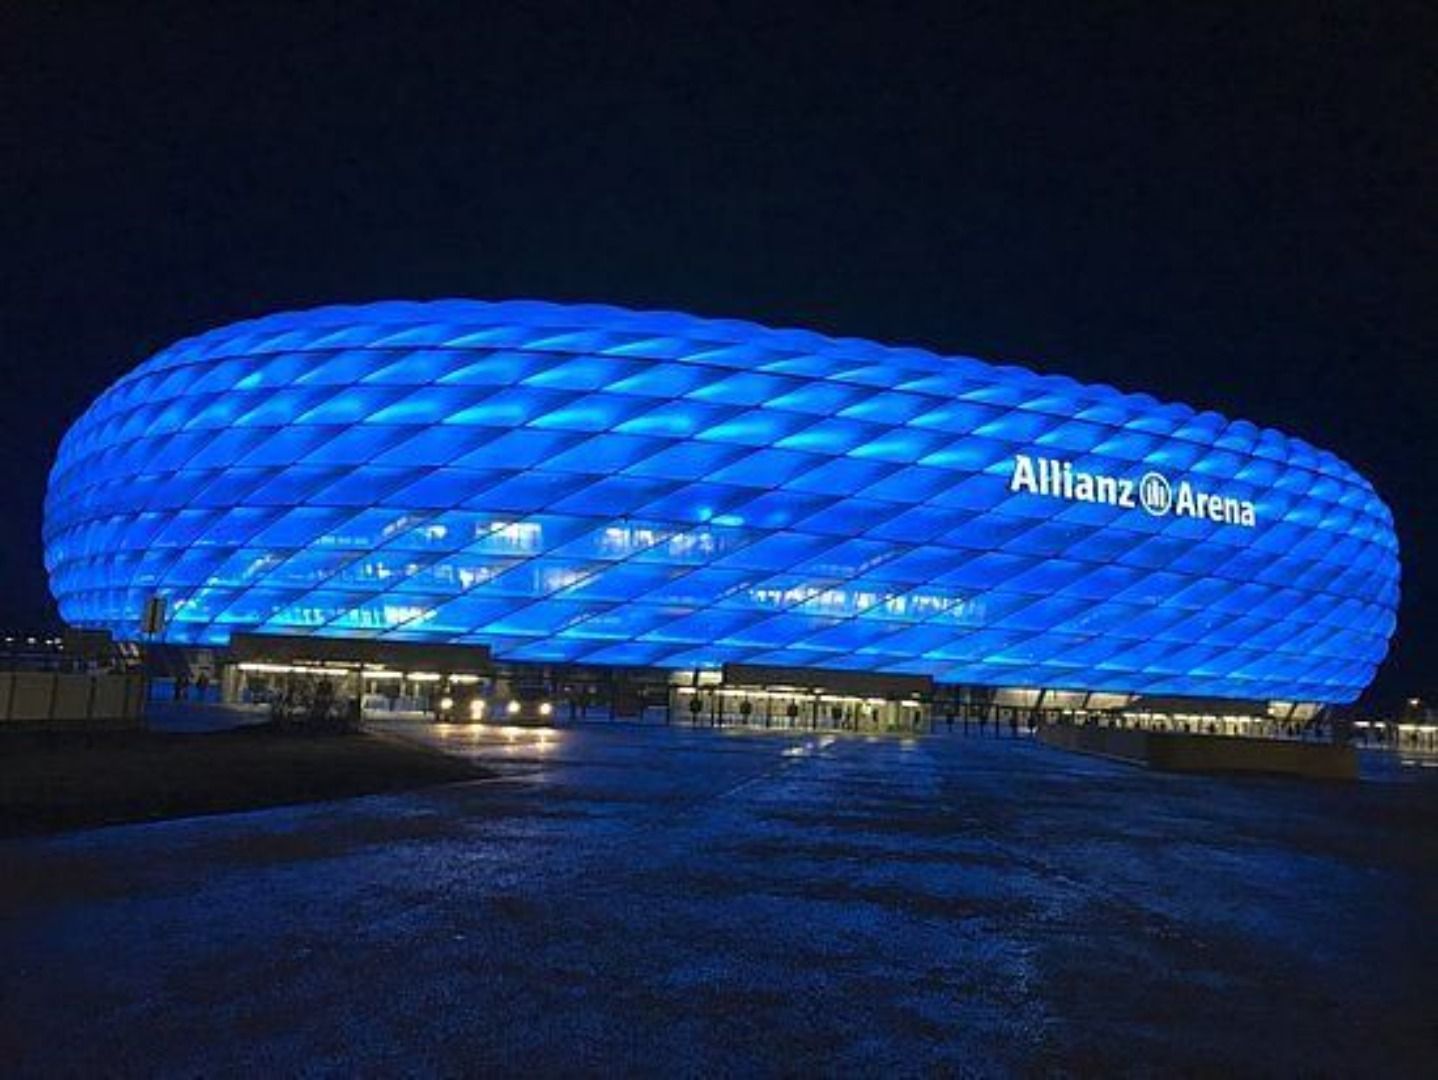 The Allianz Arena is famous for its exterior that can be lit up wonderfully.